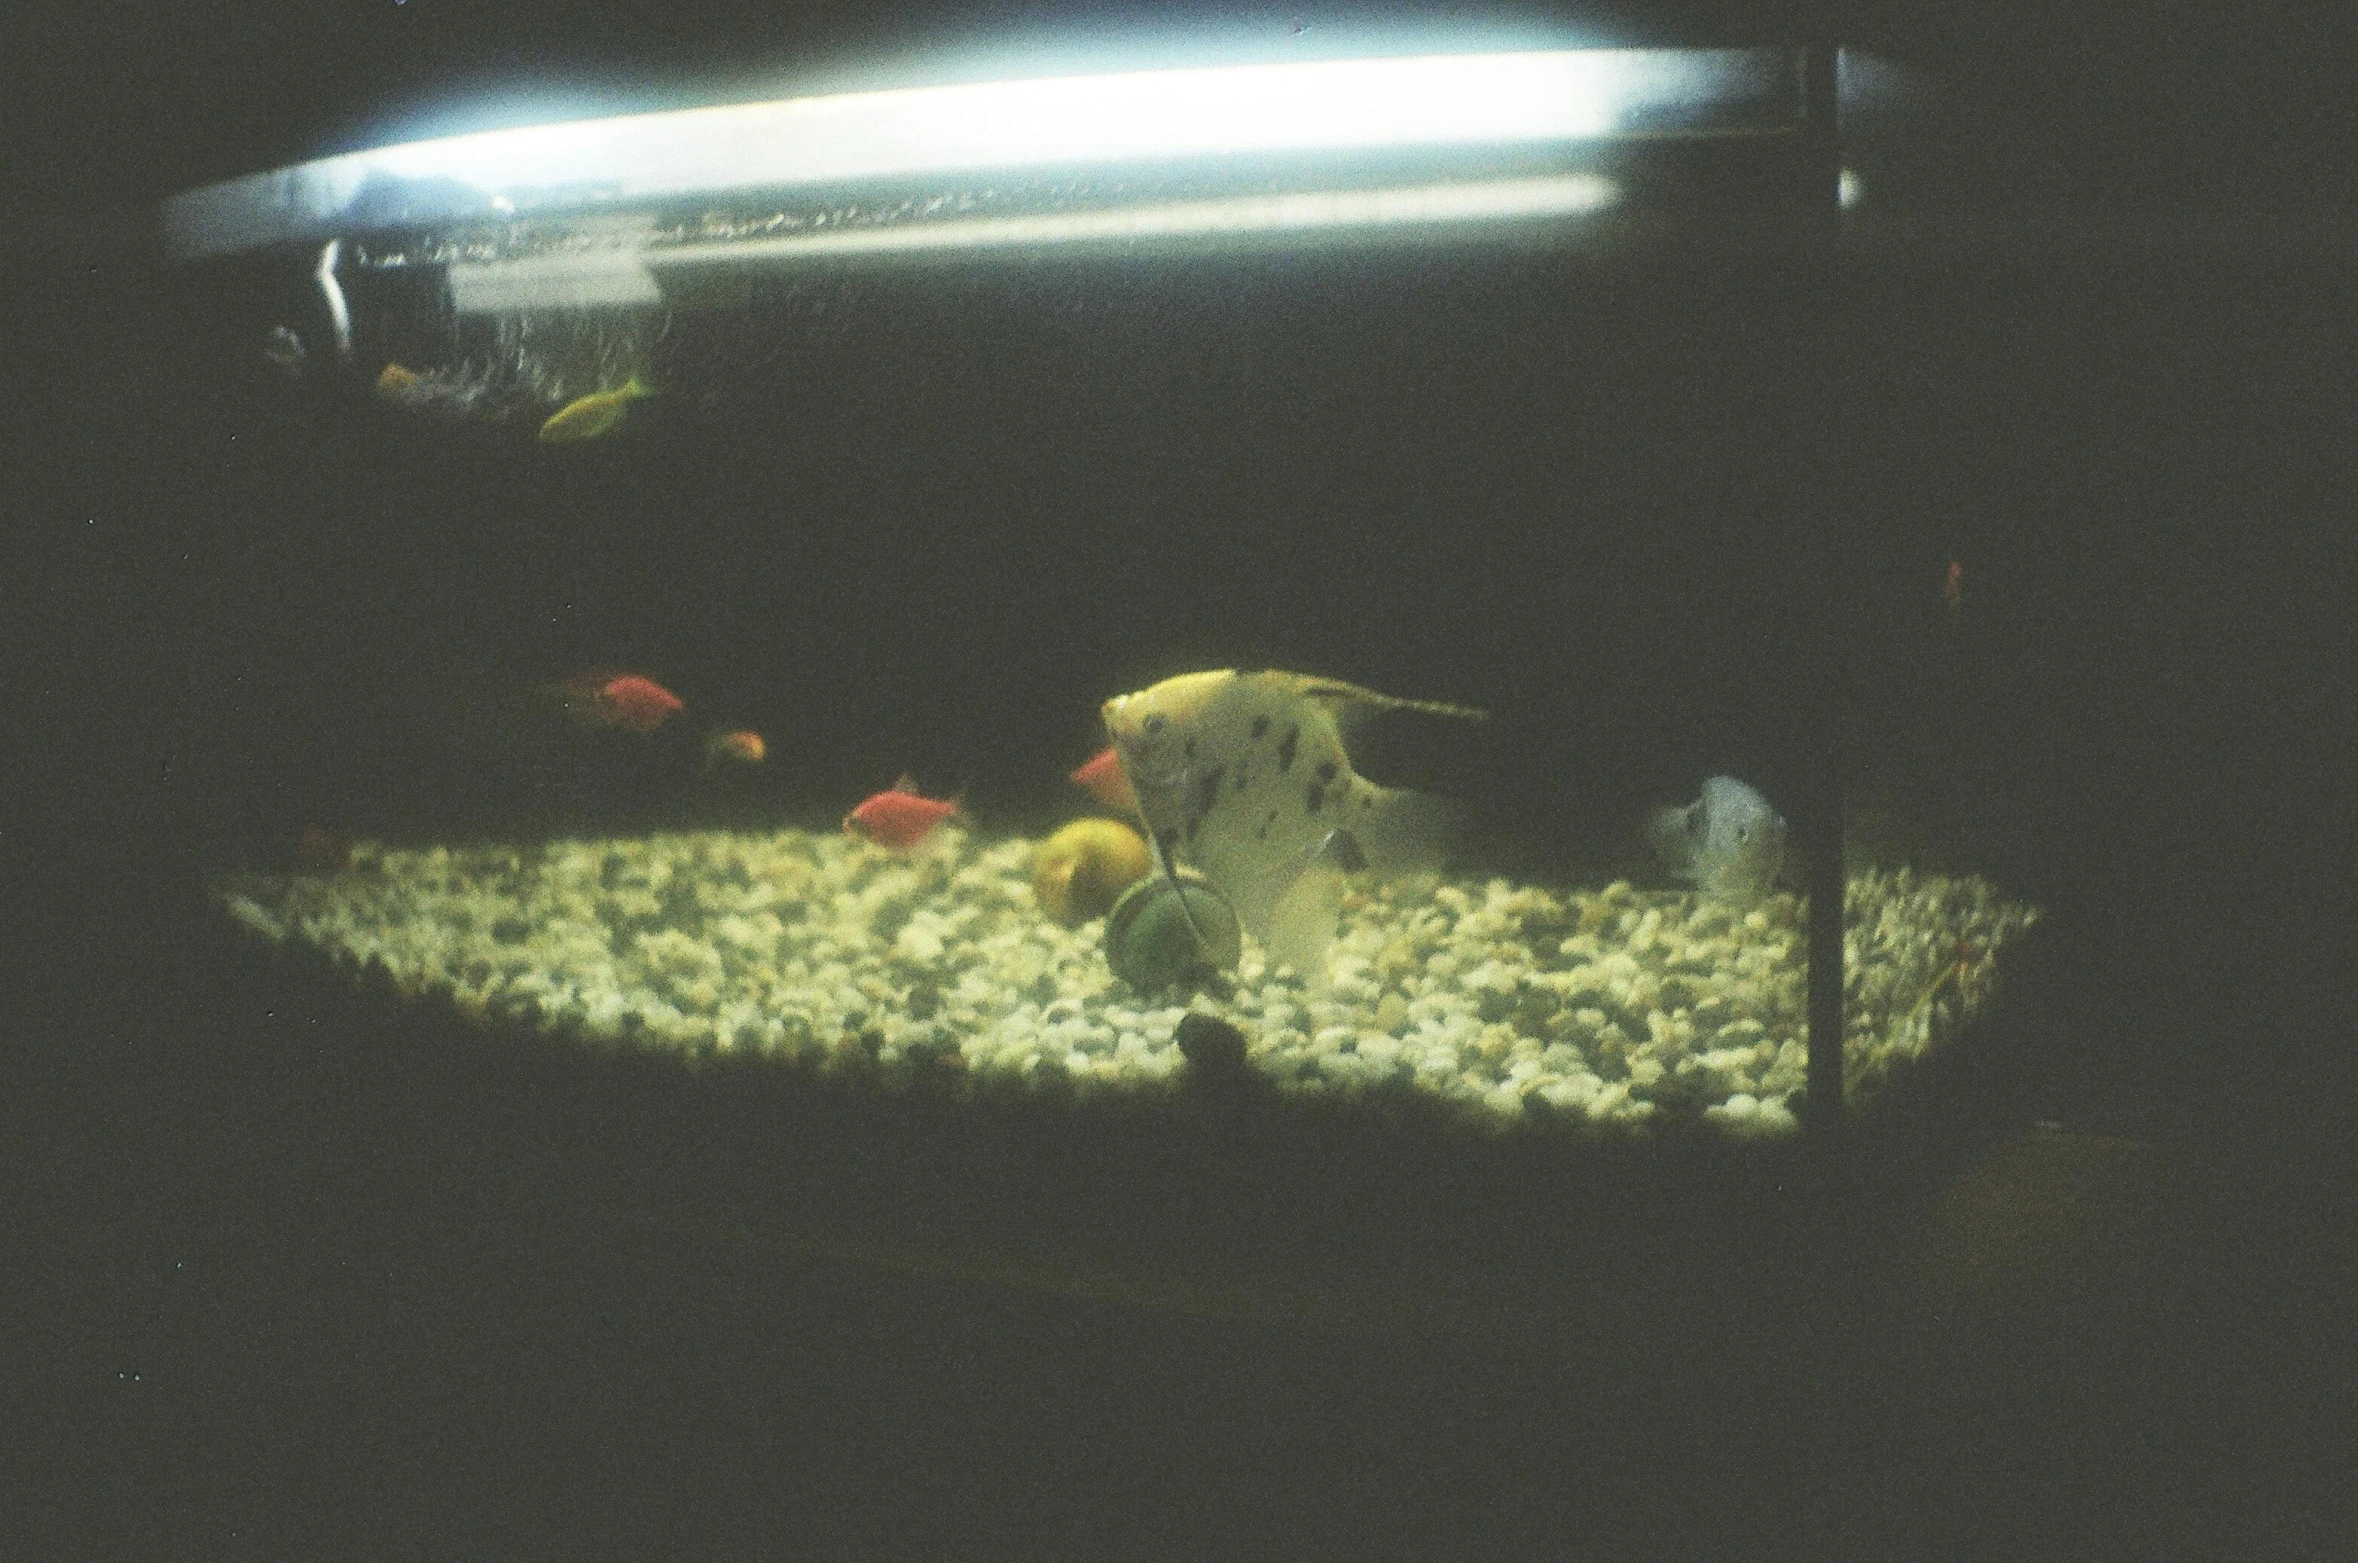 a fish tank filled with different types of fish, an album cover, inspired by Elsa Bleda, unsplash, realism, 3 5 mm kodak color ektochrome, tri-x 400 tx, night time low light, jenny seville